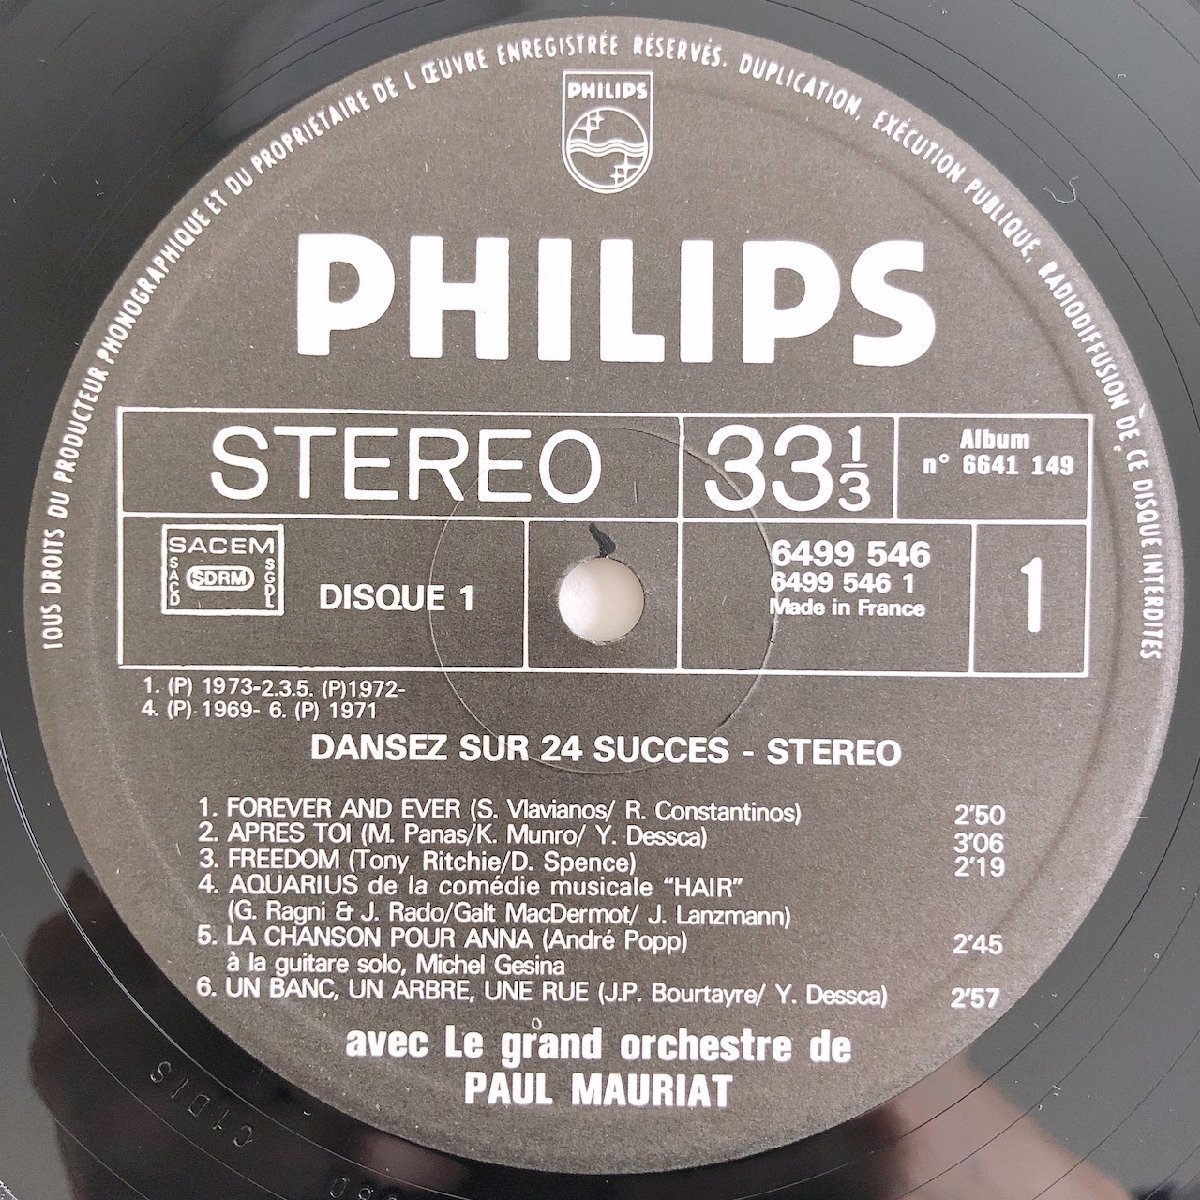 LP/ PAUL MAURIAT / DANCE TO 24 HITS-STEREO / ポール・モーリア / フランス盤 2枚組 直輸入 PHILIPS 6499546 31015の画像3